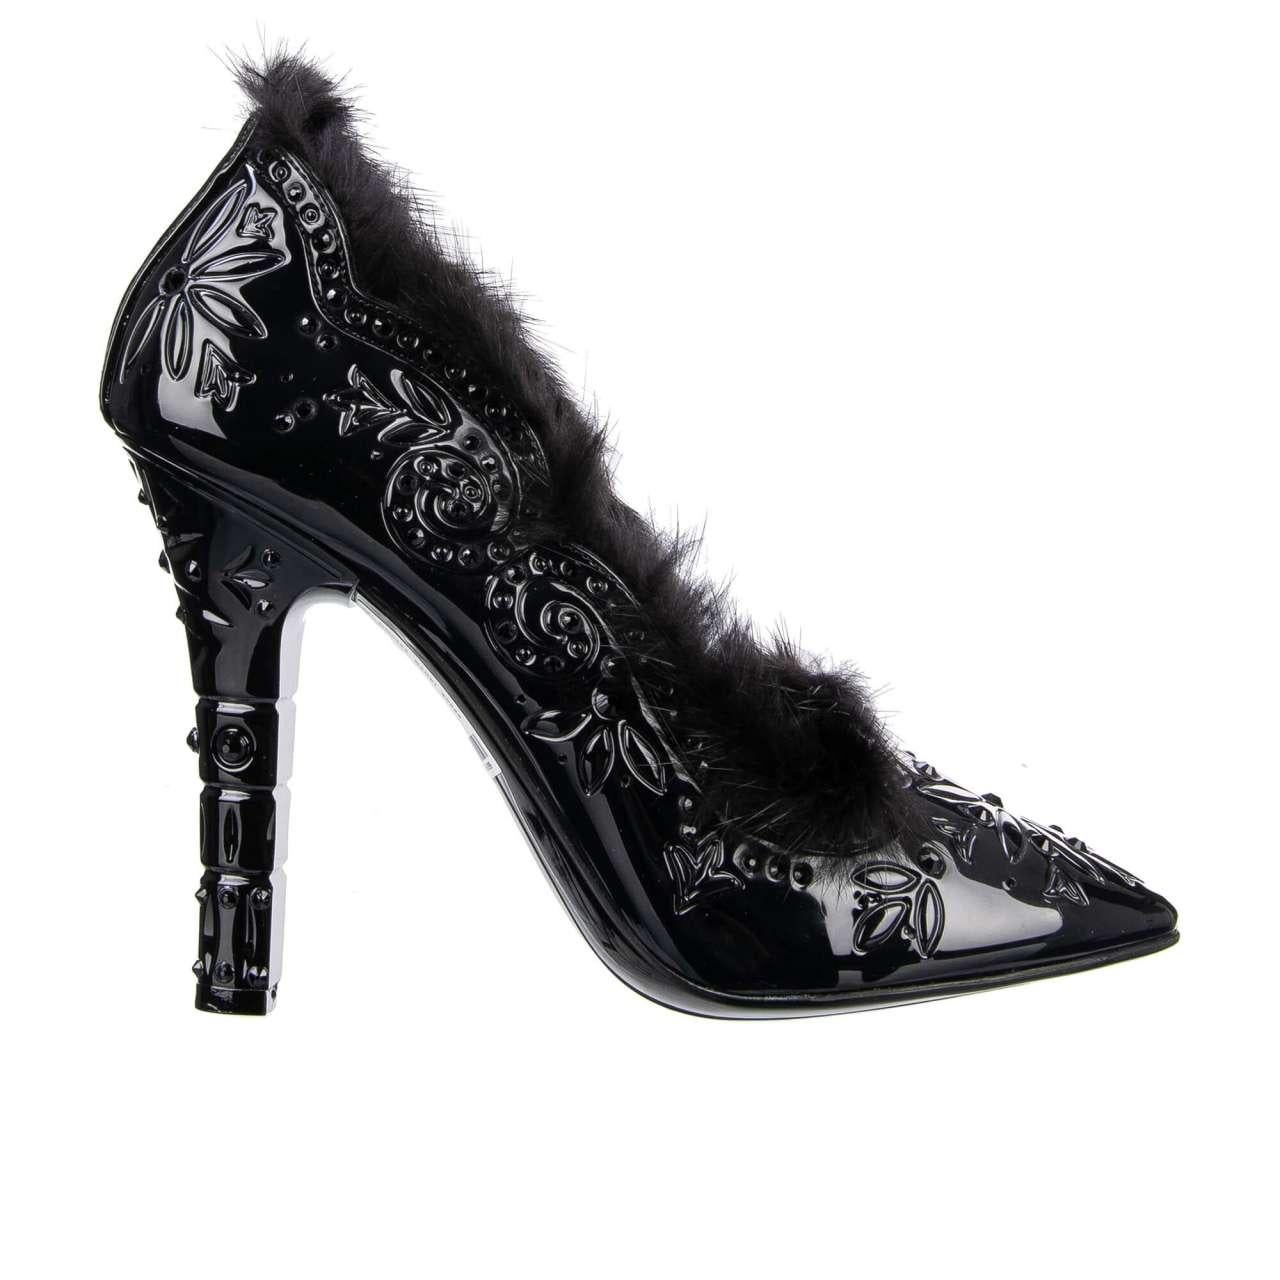 Dolce & Gabbana - Cinderella Fur and PVC Pumps with Crystals Black 37 For Sale